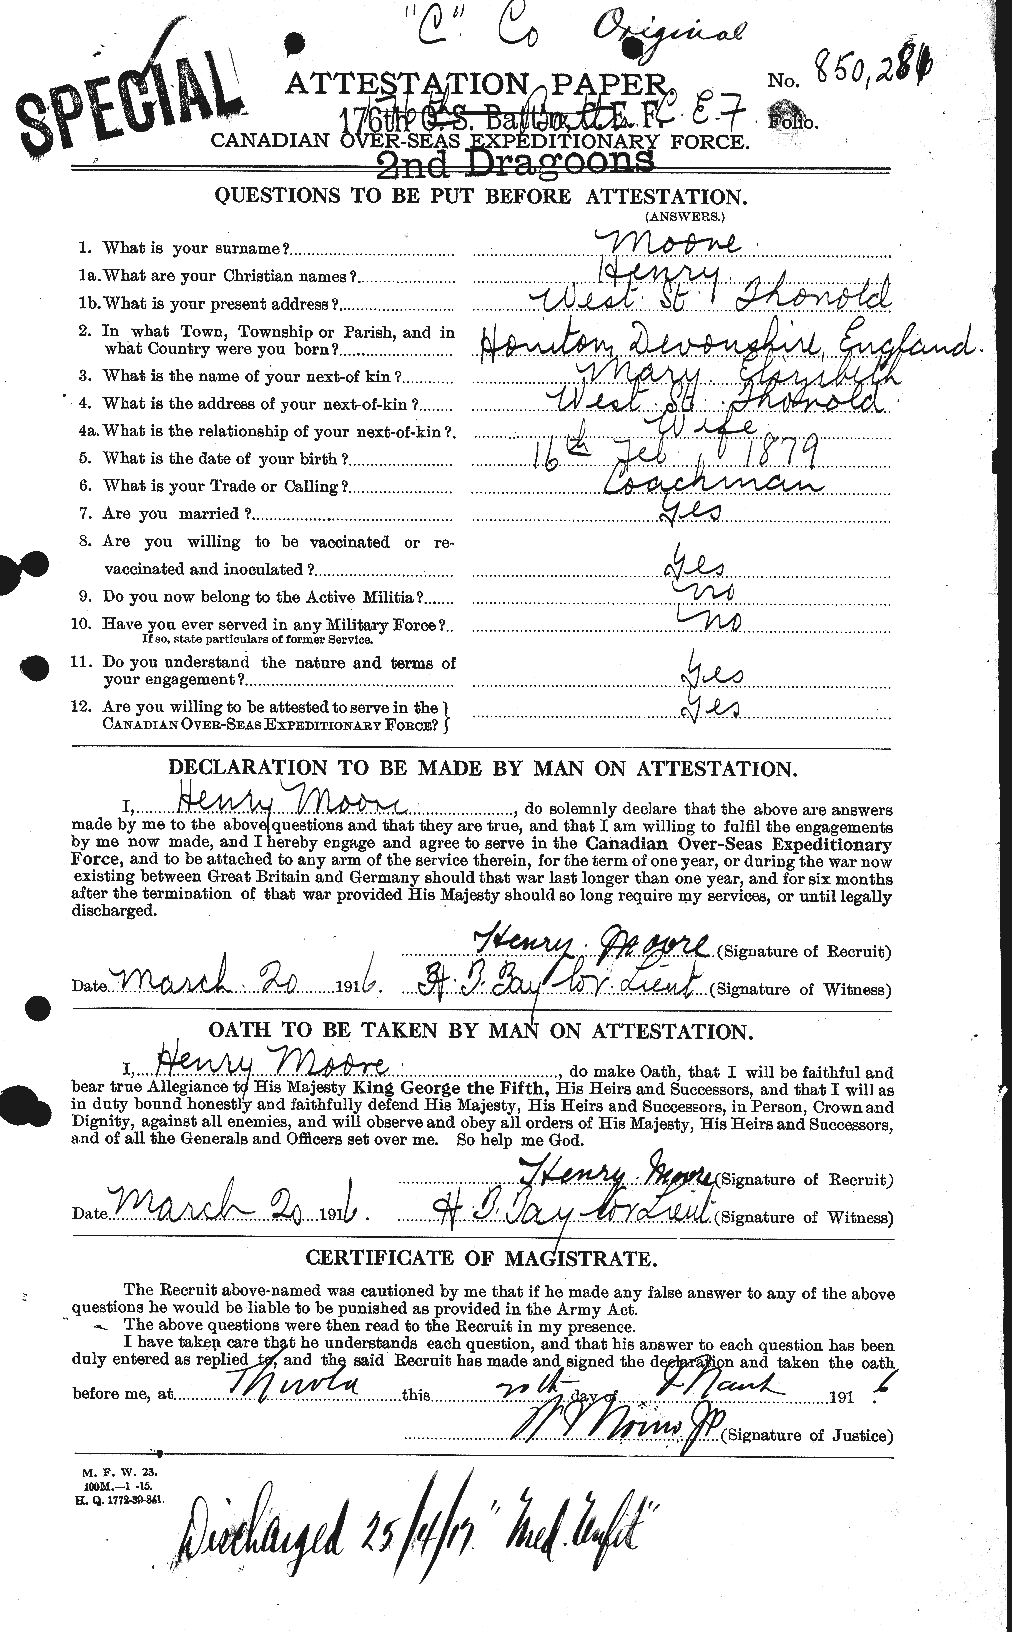 Personnel Records of the First World War - CEF 502094a